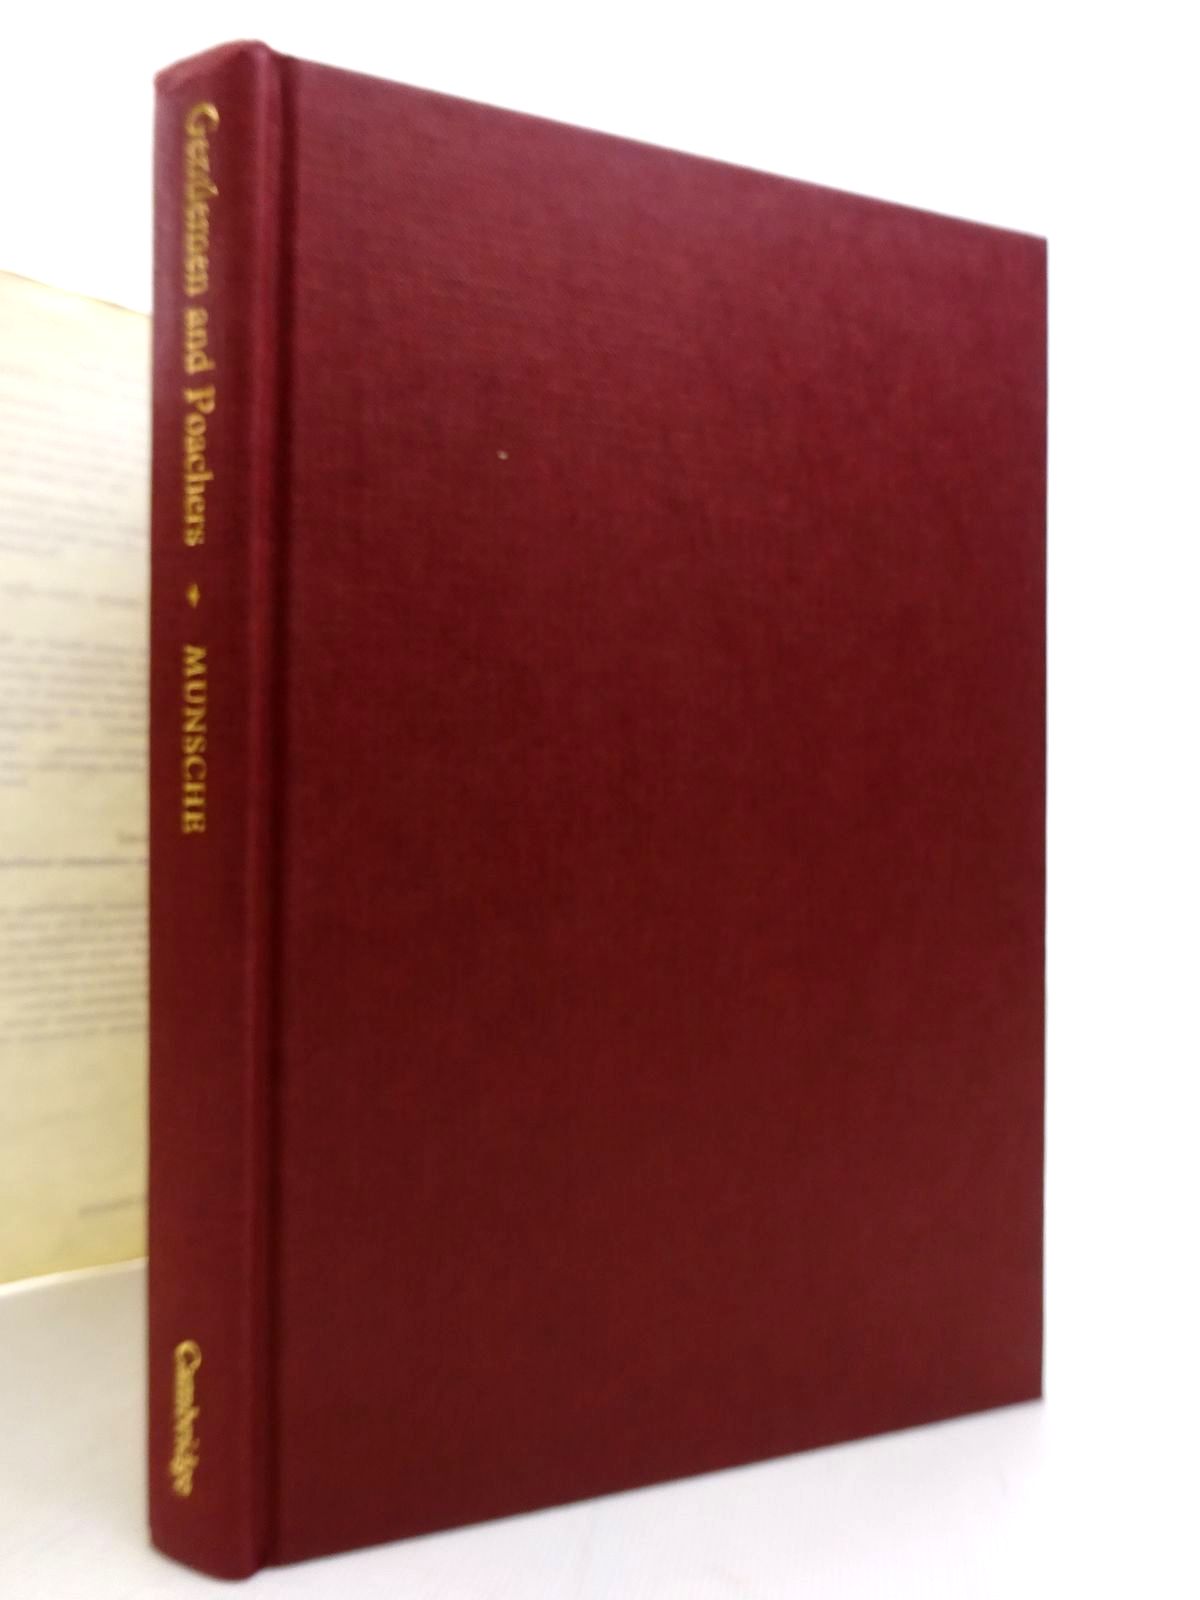 Photo of GENTLEMEN AND POACHERS: THE ENGLISH GAME LAWS 1671-1831 written by Munsche, P.B. published by Cambridge University Press (STOCK CODE: 1815869)  for sale by Stella & Rose's Books